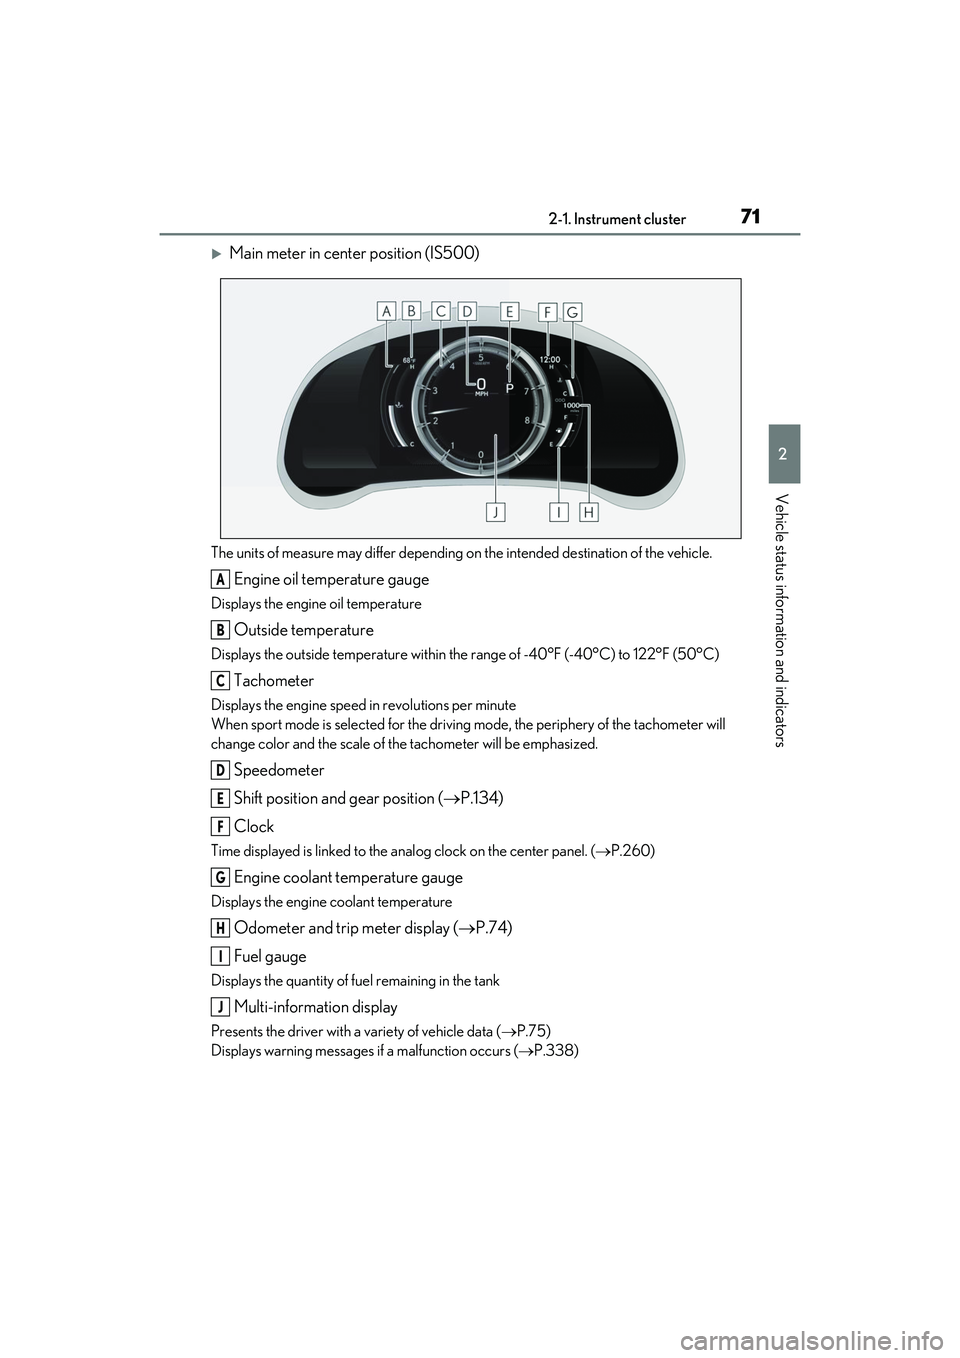 LEXUS IS350 2022  Owners Manual 712-1. Instrument cluster
2
Vehicle status information and indicators
Main meter in center position (IS500)
The units of measure may differ depending on the intended destination of the vehicle.
Eng